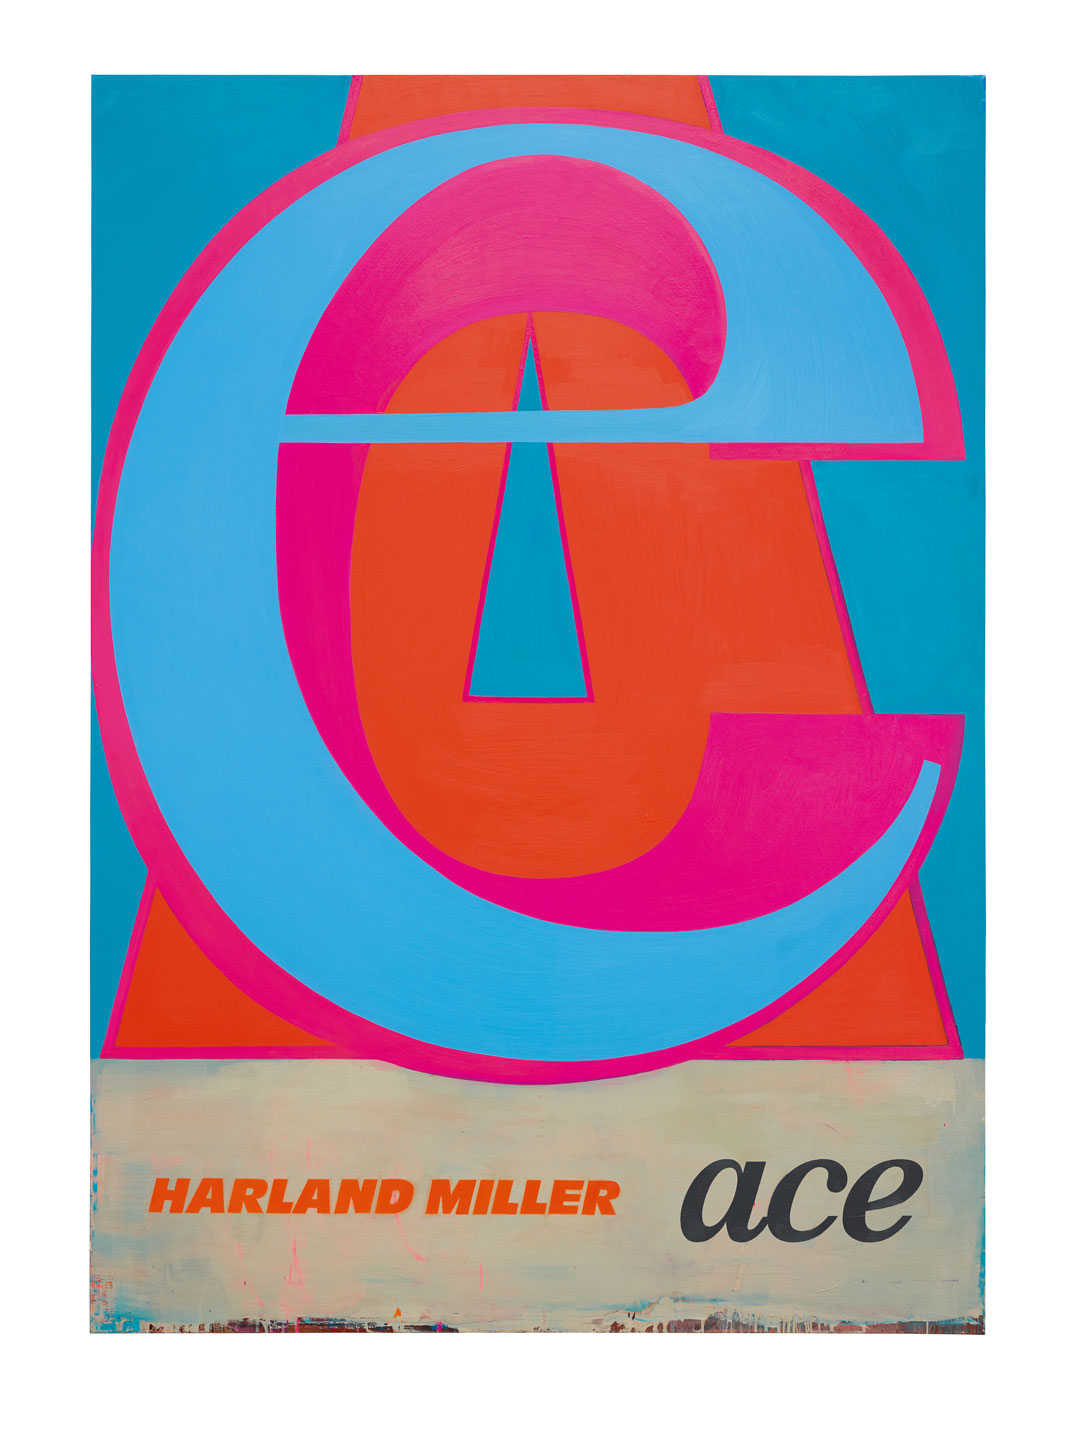 Ace (2017) by Harland Miller